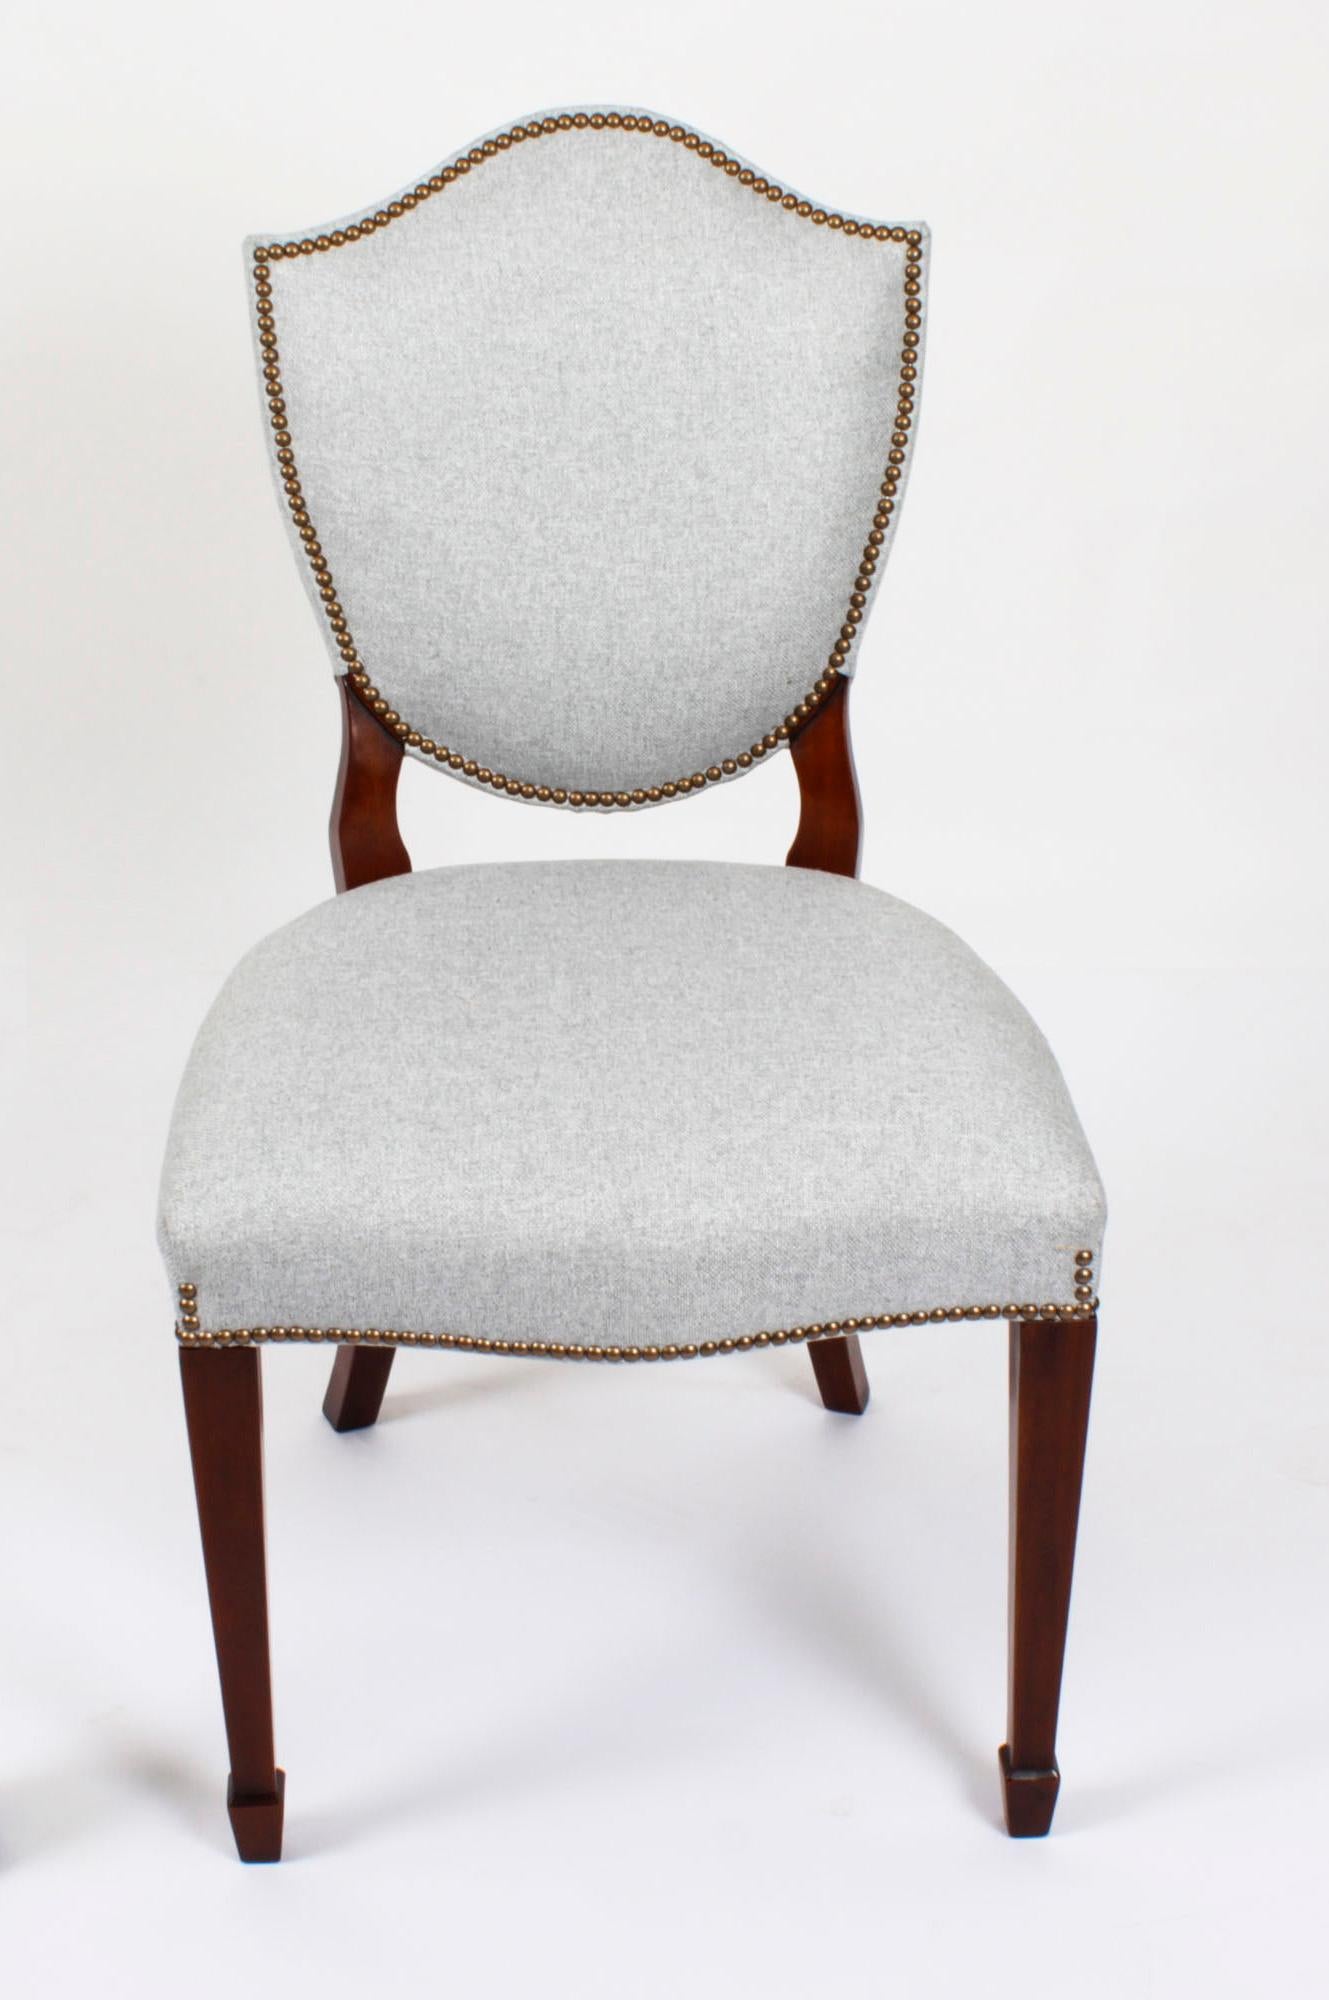 A superb Vintage set of twelve Hepplewhite Revival shield back dining chairs with upholstered backs, dating from the second half of the 20th Century.

Beautifully hand crafted from solid mahogany the set comprises ten side chairs and two armchairs,